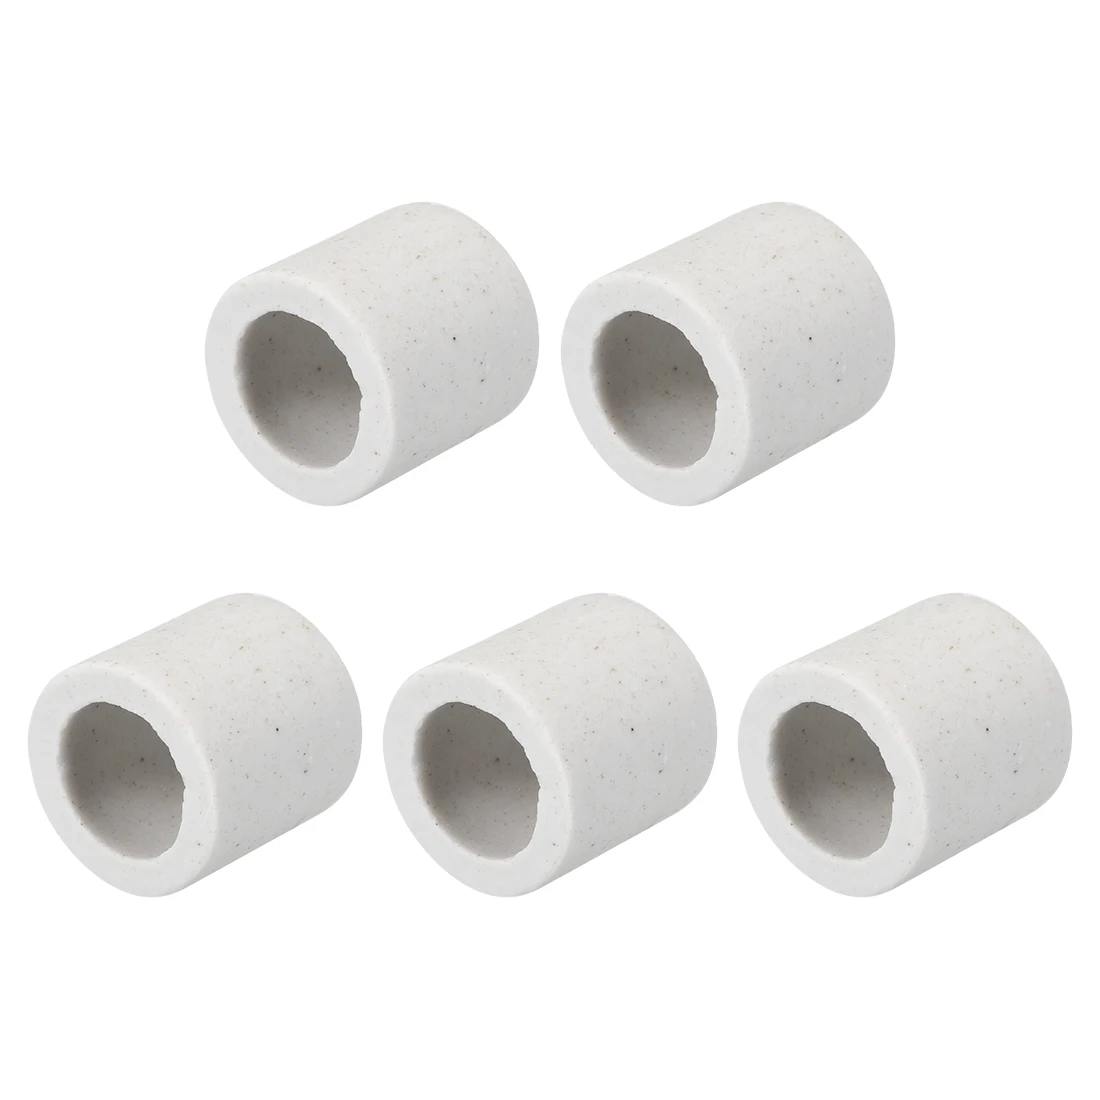 

uxcell 5 Pcs 10mm Dia Ceramic Insulation Tube Single Bore Porcelain Insulator Pipe for Heating Element